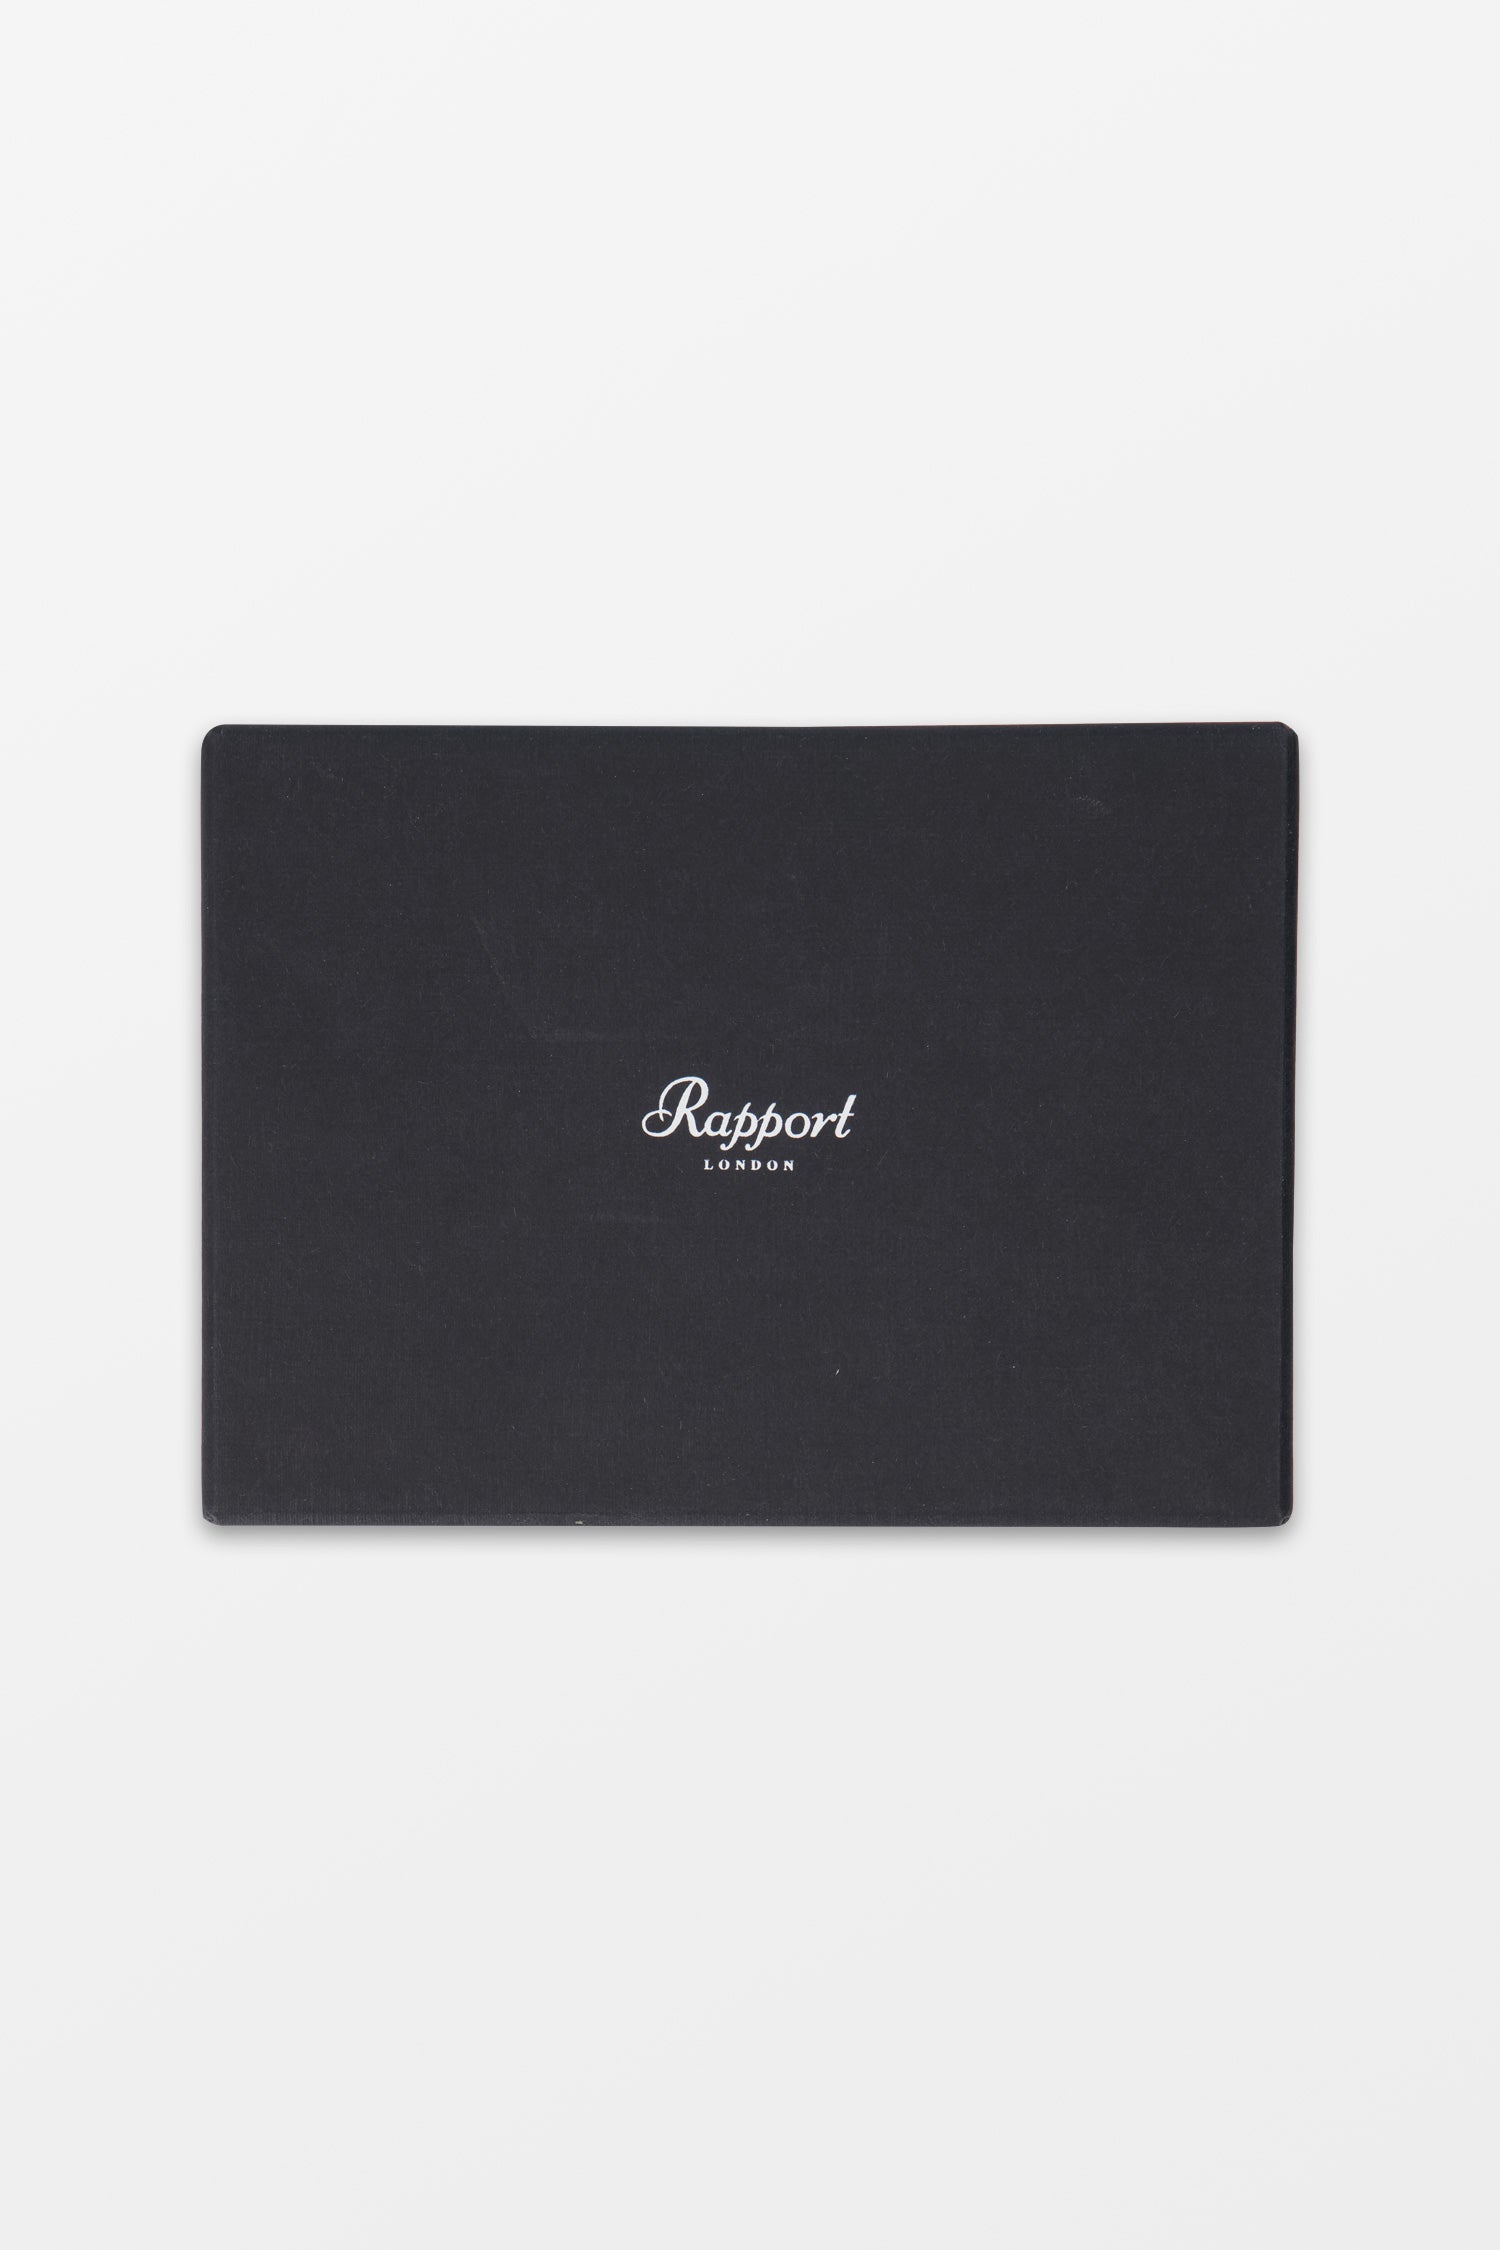 Rapport Blue Sussex Coin Purse